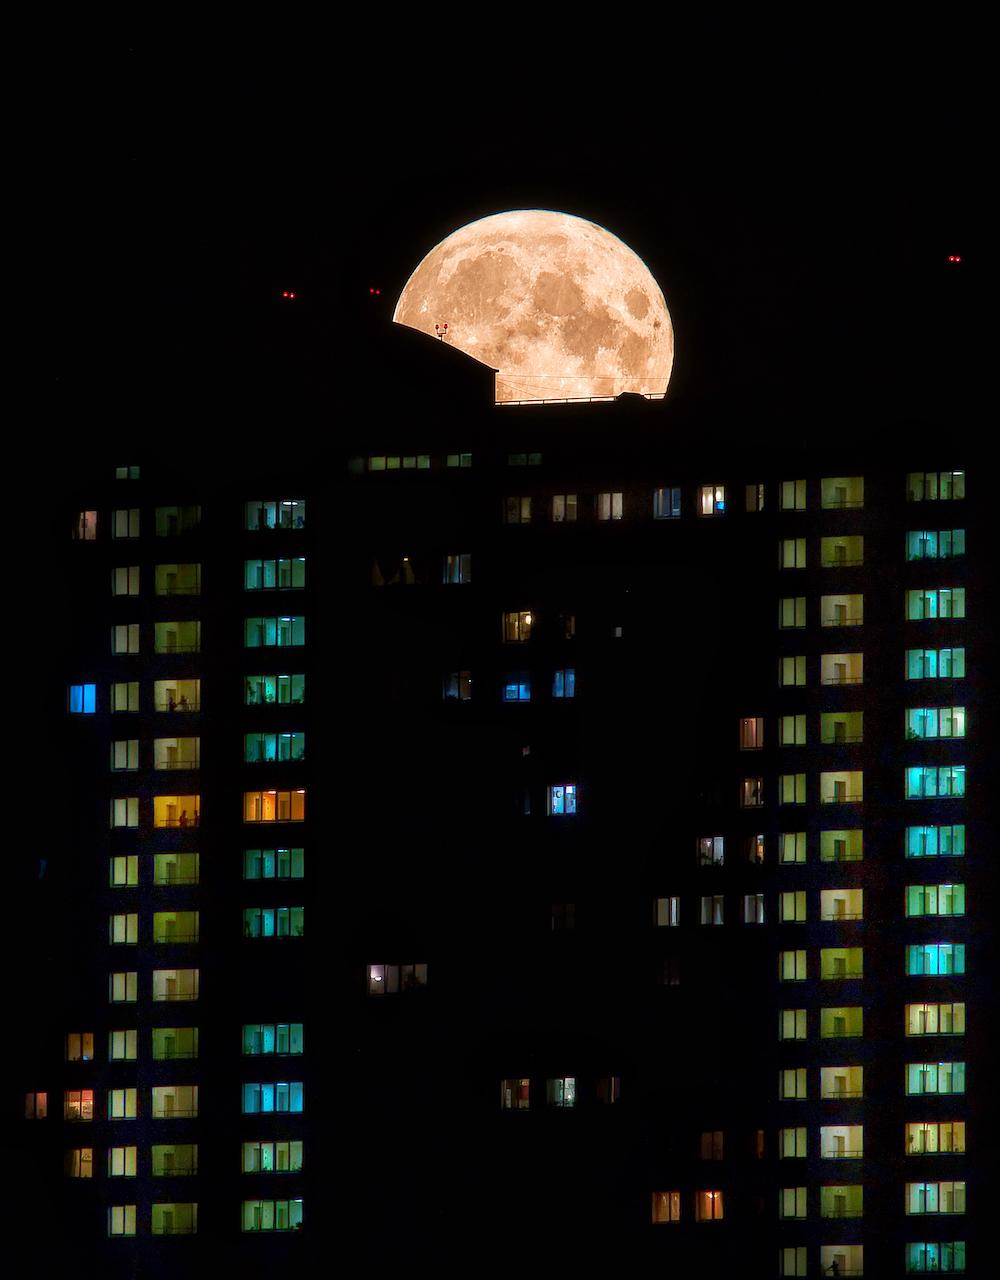 A full Moon appears over a block of flats lit up at night